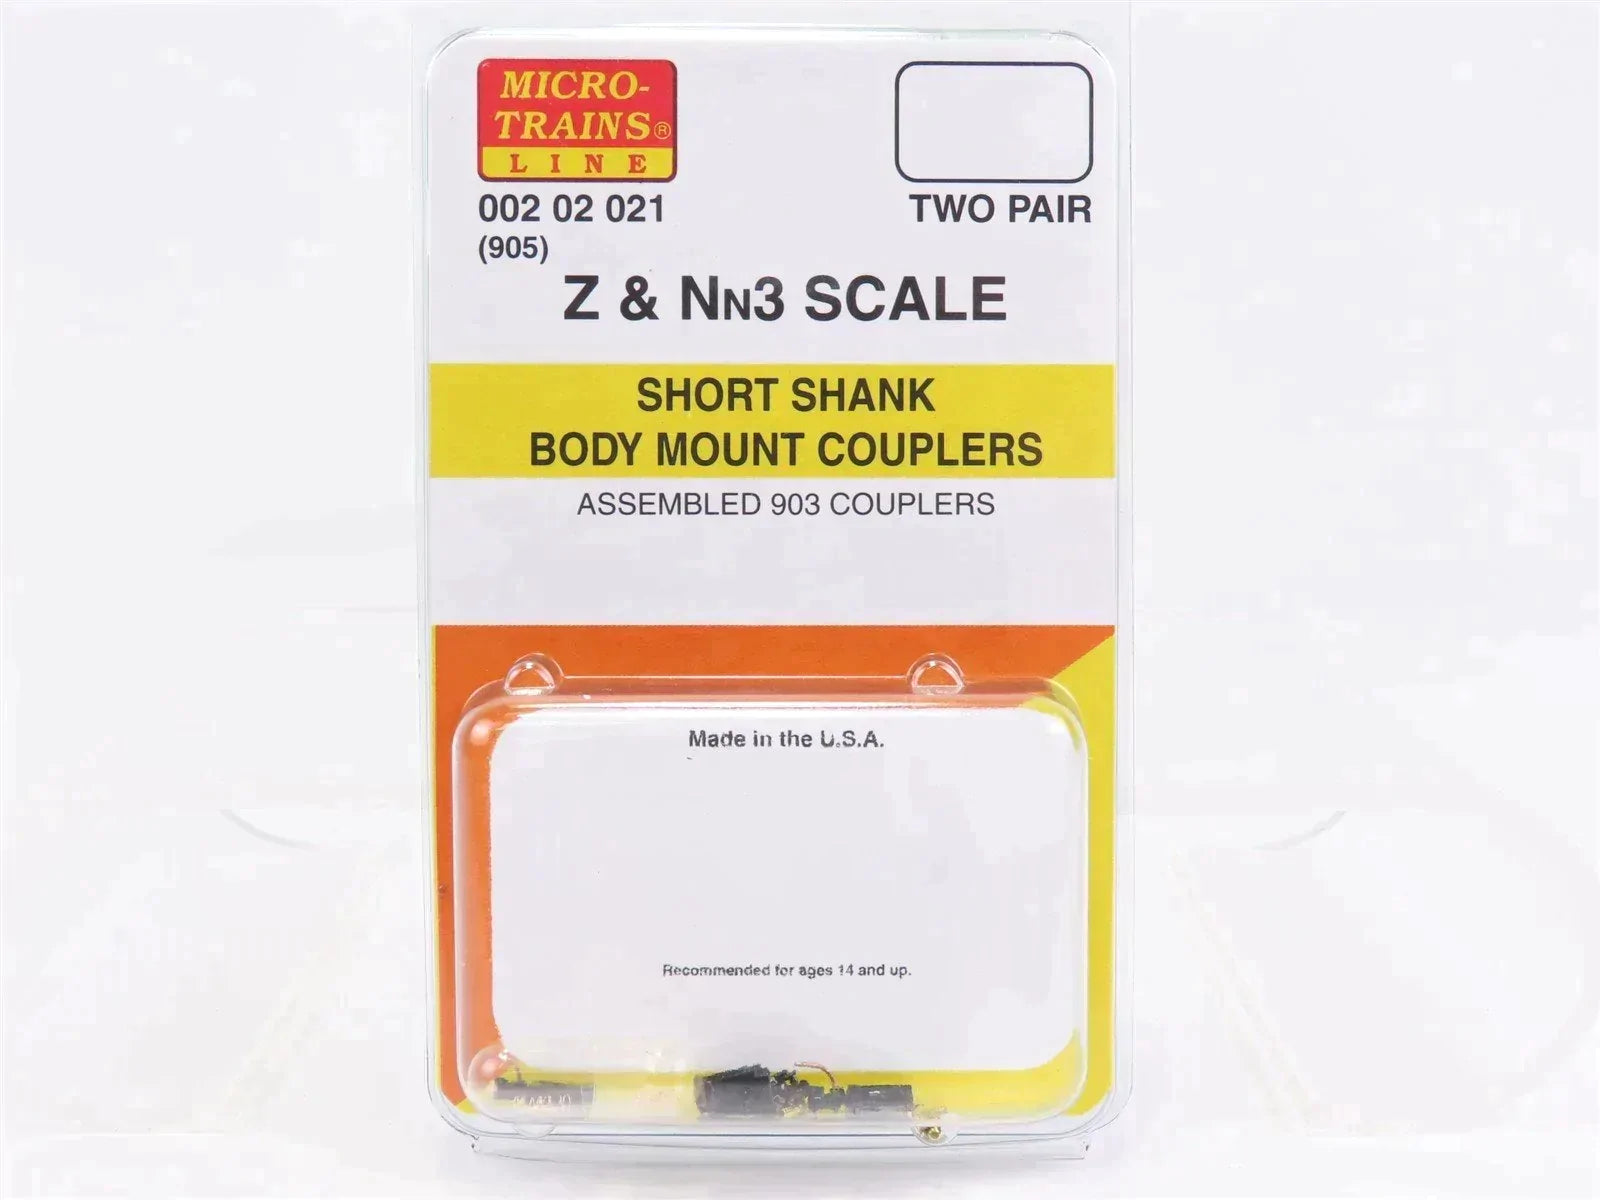 Z & Nn3 Scale Micro-Trains MTL 00202021 Short Shank Body Mount Couplers